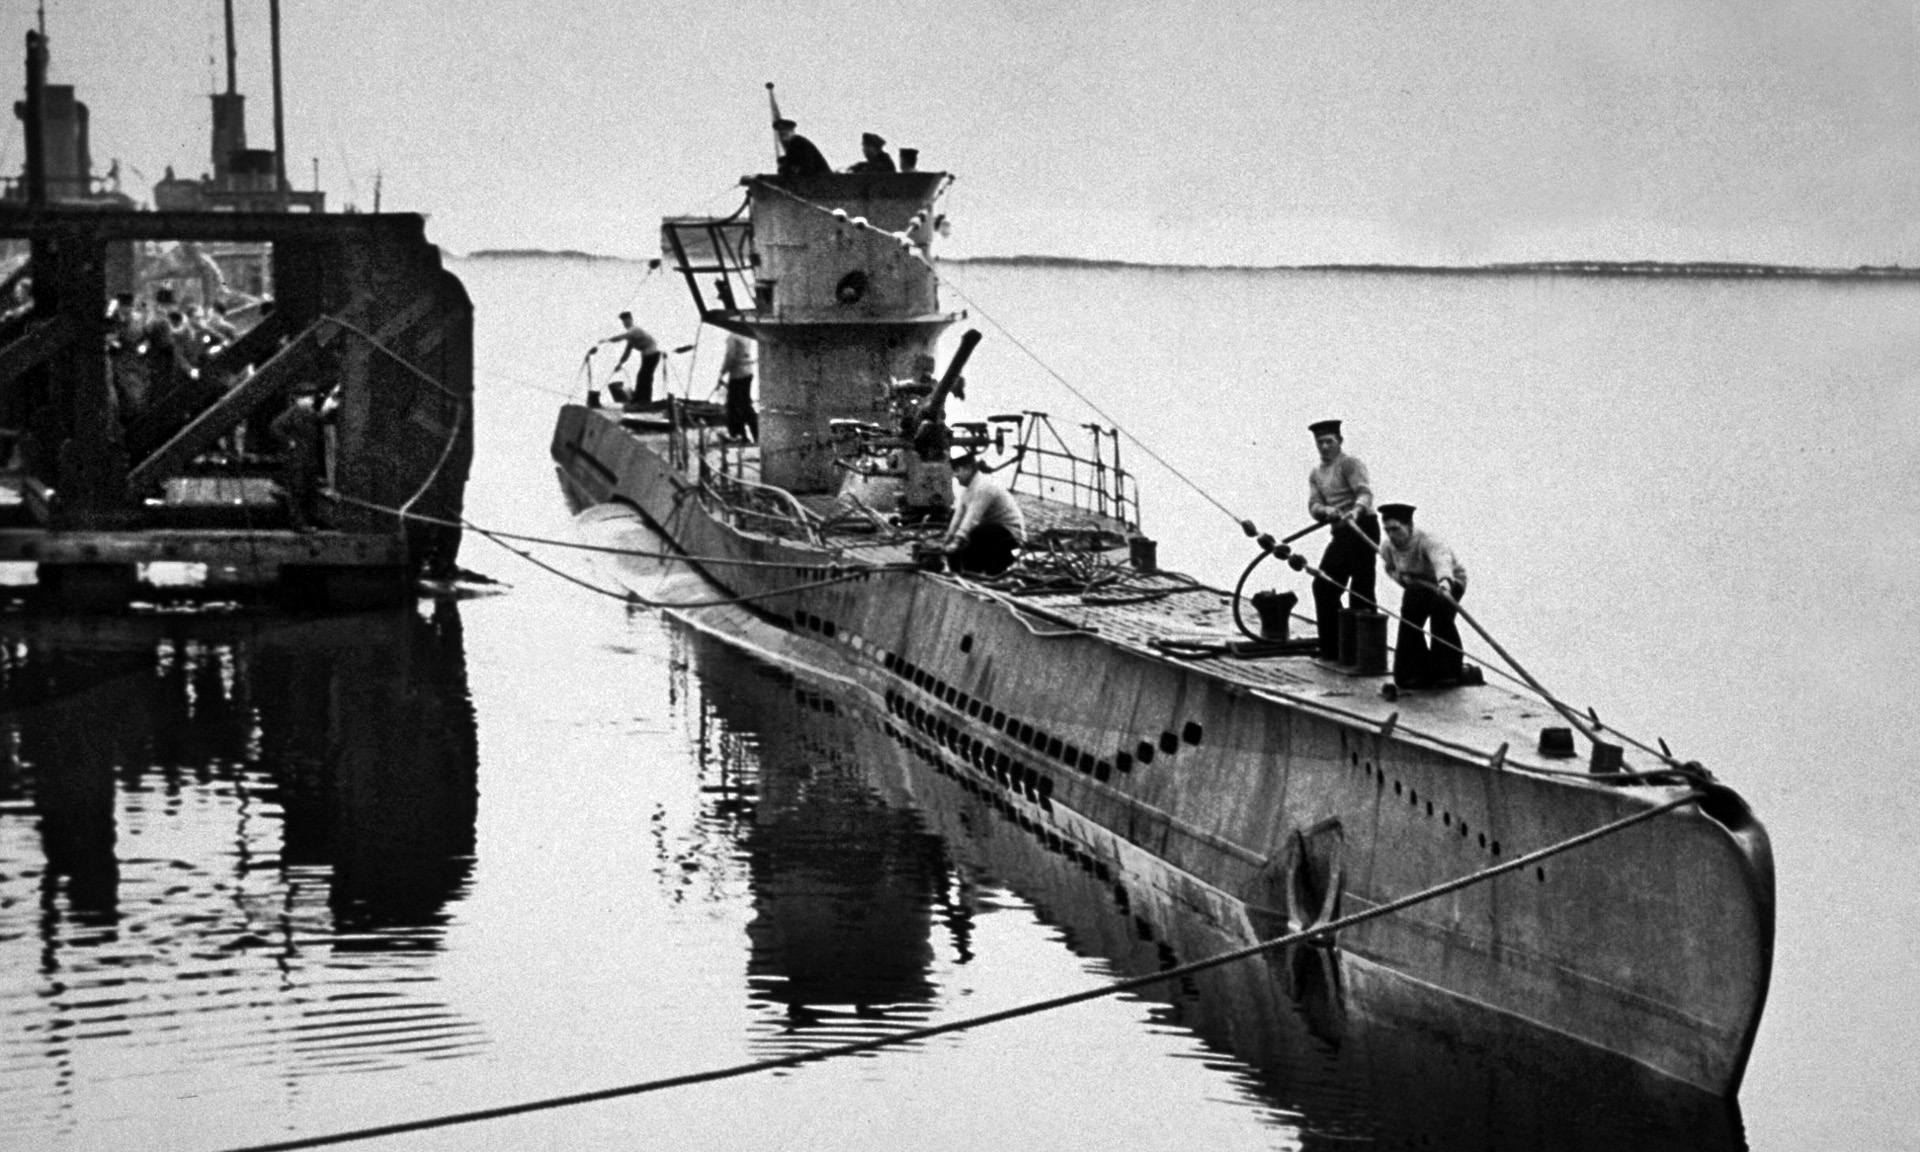 German submarine U-570, pictured here, sank the merchant ship City of Cairo and along with it an estimated 100 tons of silver. British naval forces captured U-570 in 1941, and the silver was recovered from a depth of 17,000 feet in 2013.